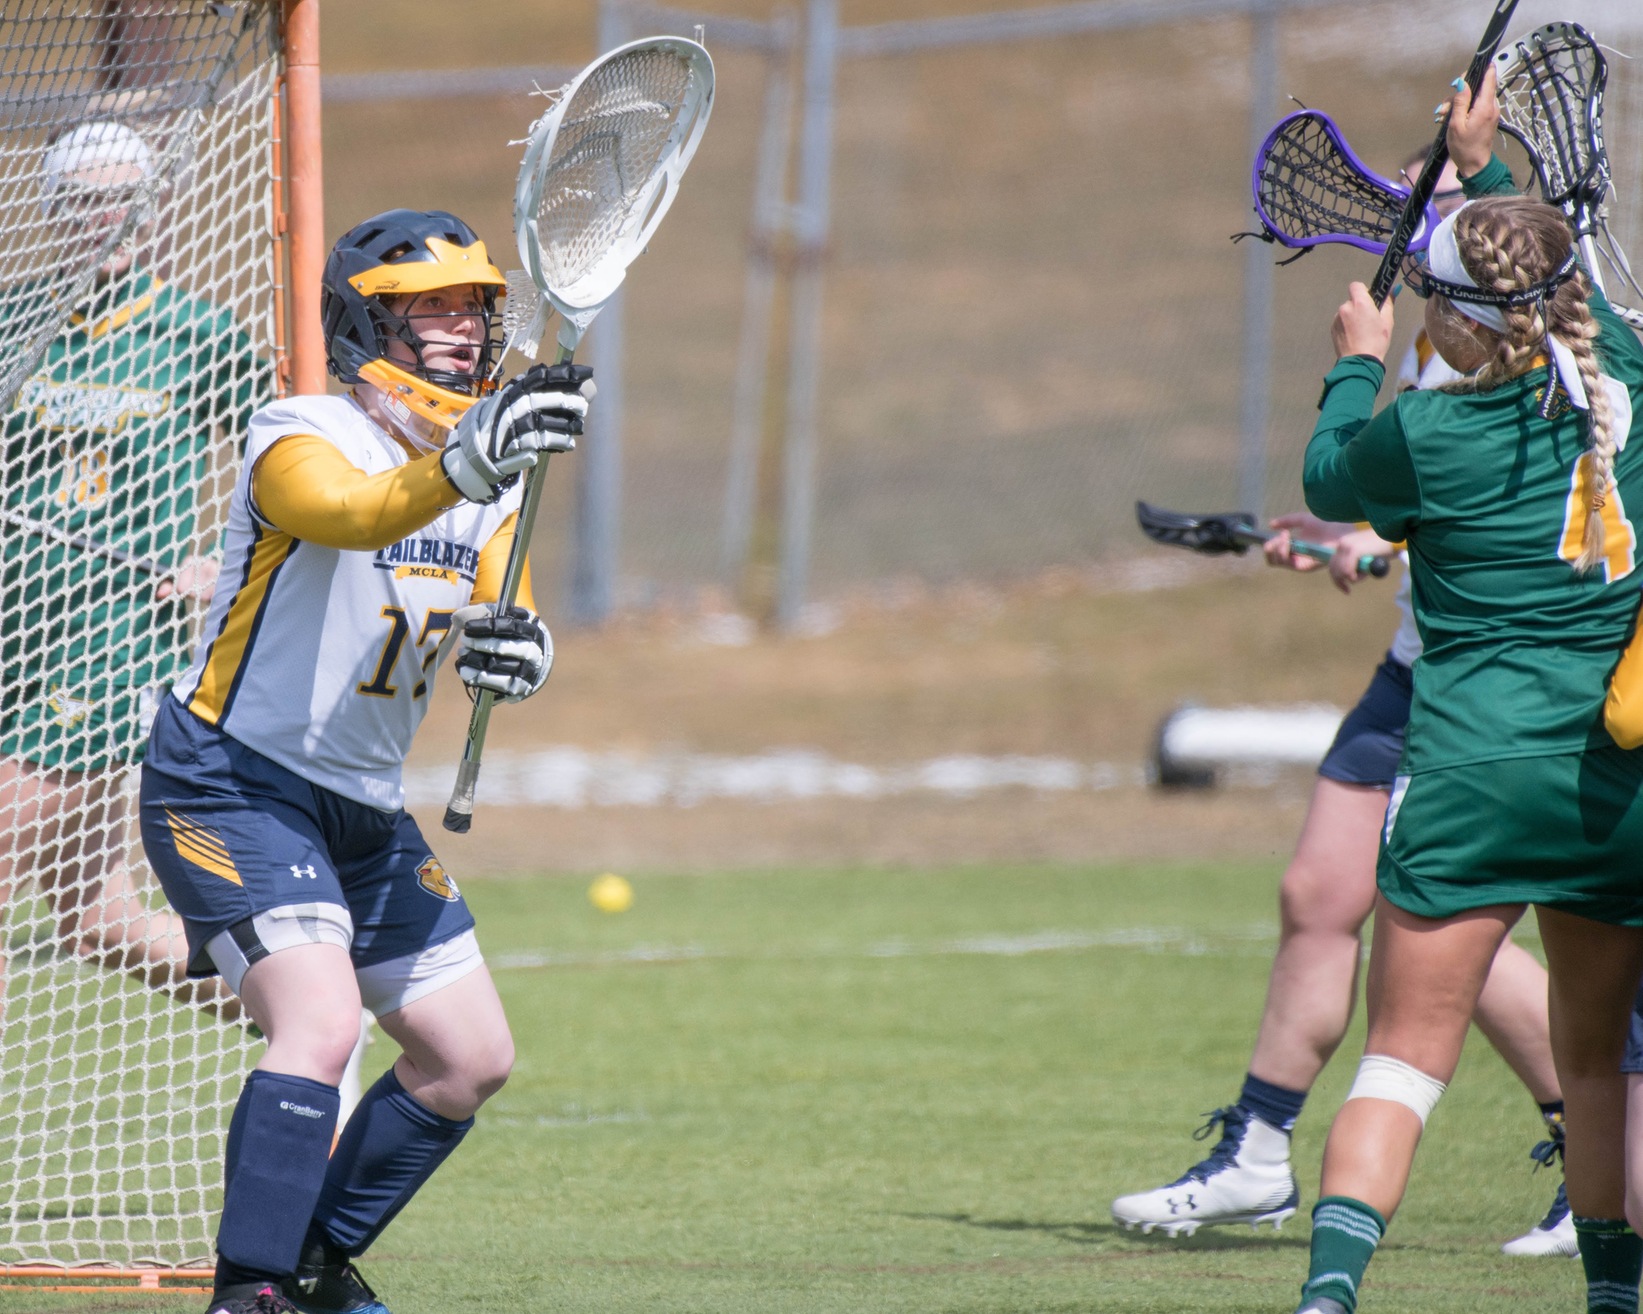 Women's Lacrosse shut out at home against Worcester State